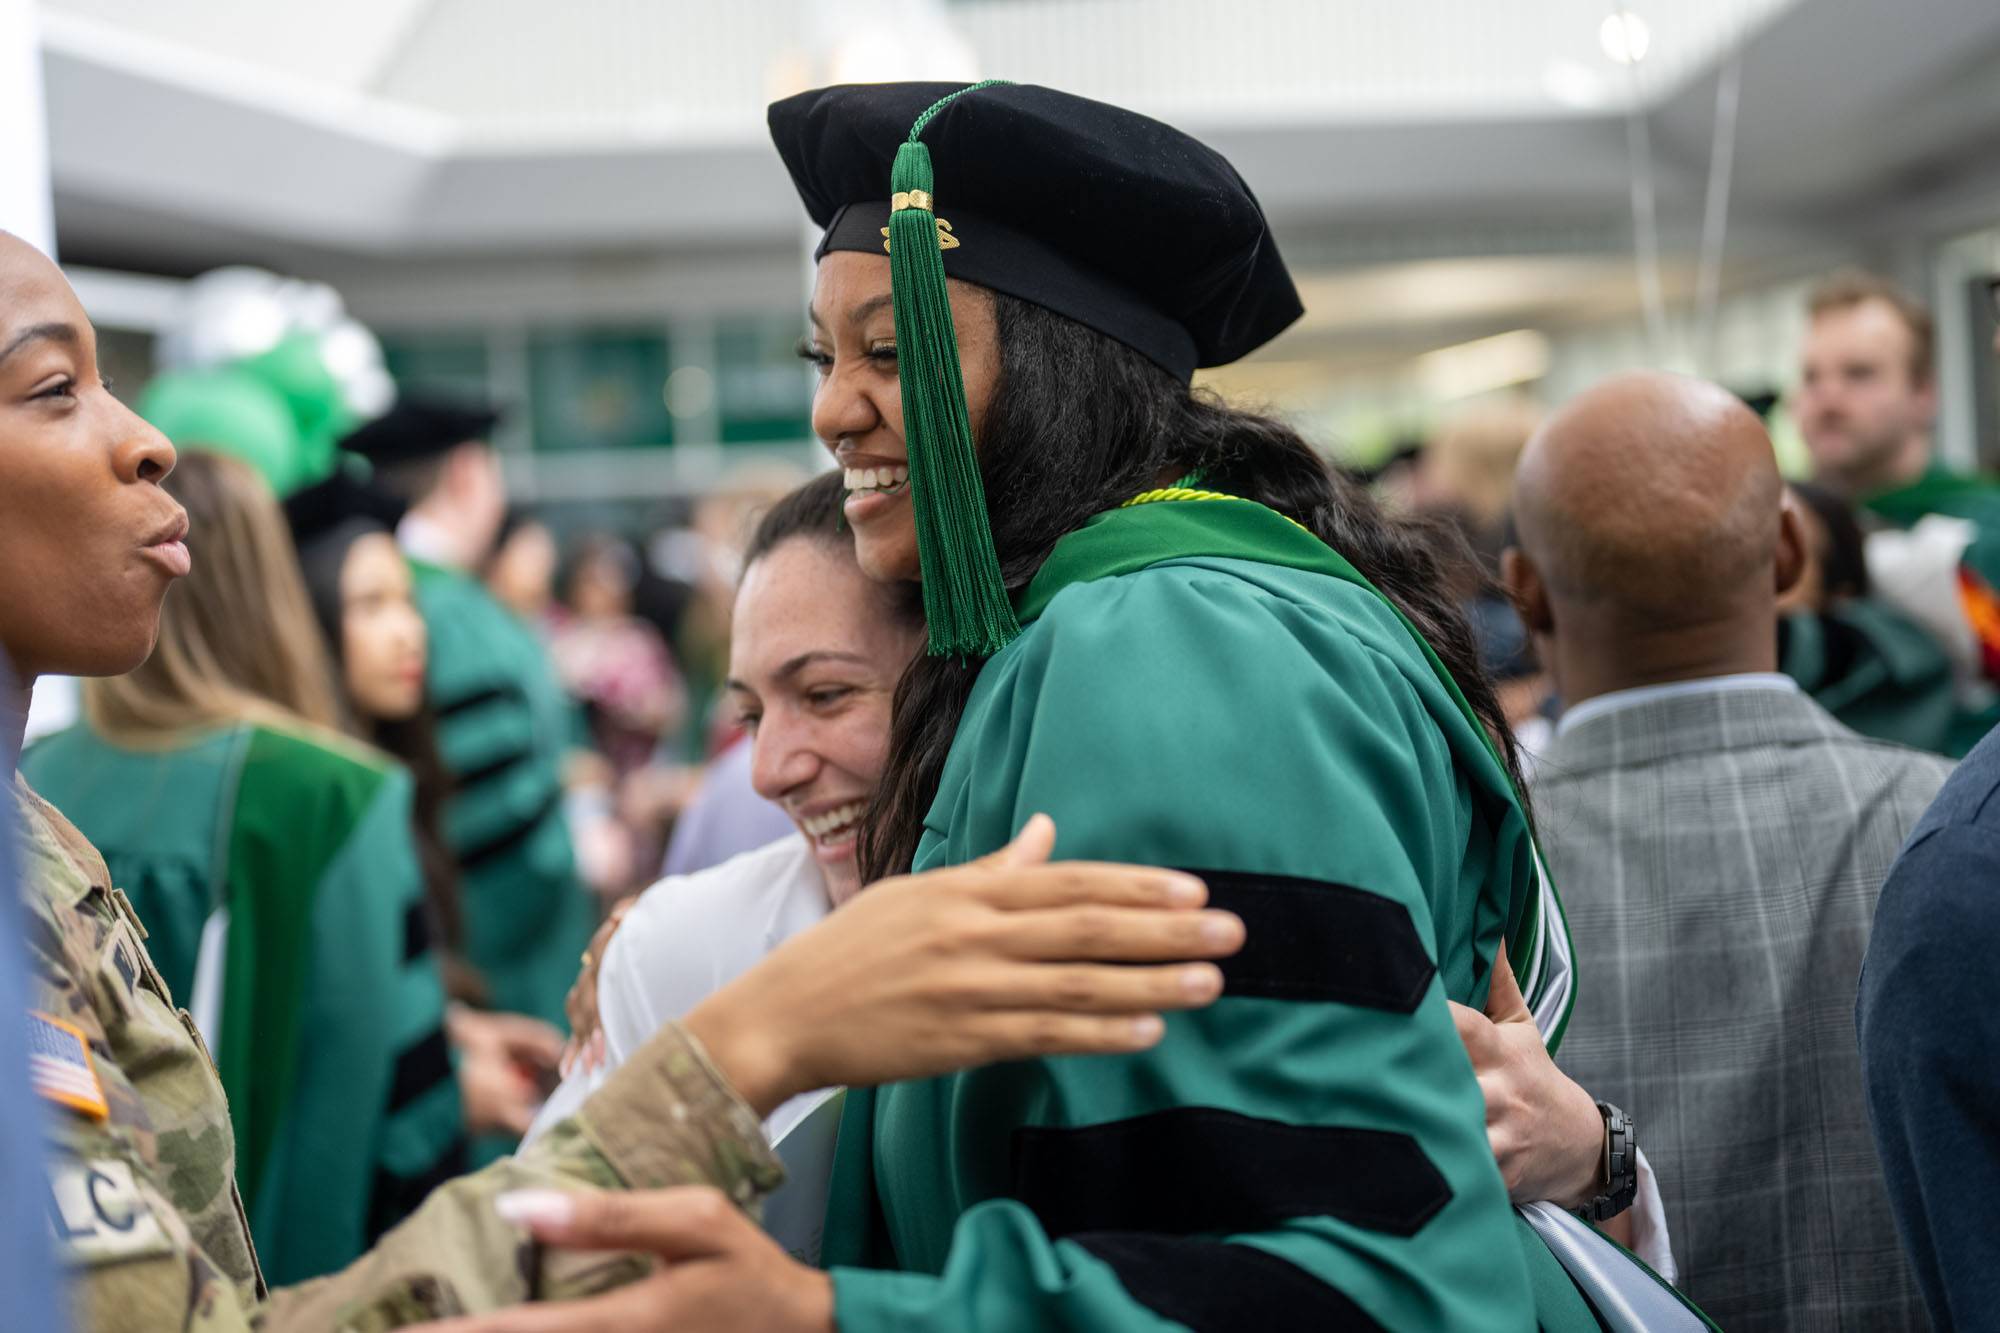 It was a day to celebrate the Heritage College graduates for, as Executive Dean Ken Johnson, D.O., said in his remarks, "your grit, your determination, your perseverance and your achievement."